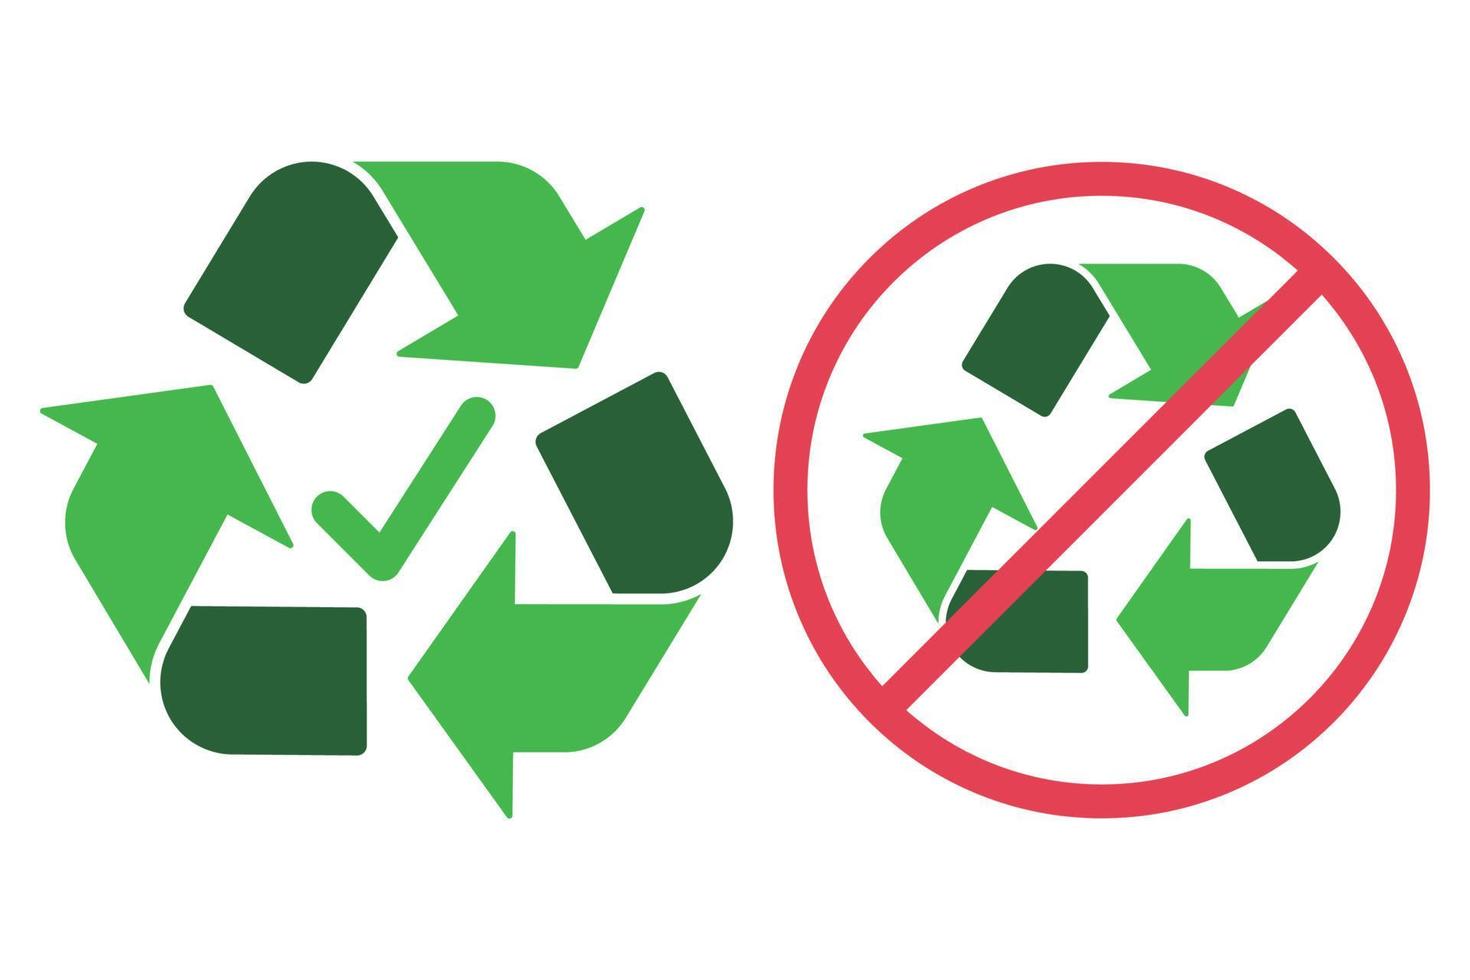 Recycleable And Non Recycleable Signs vector